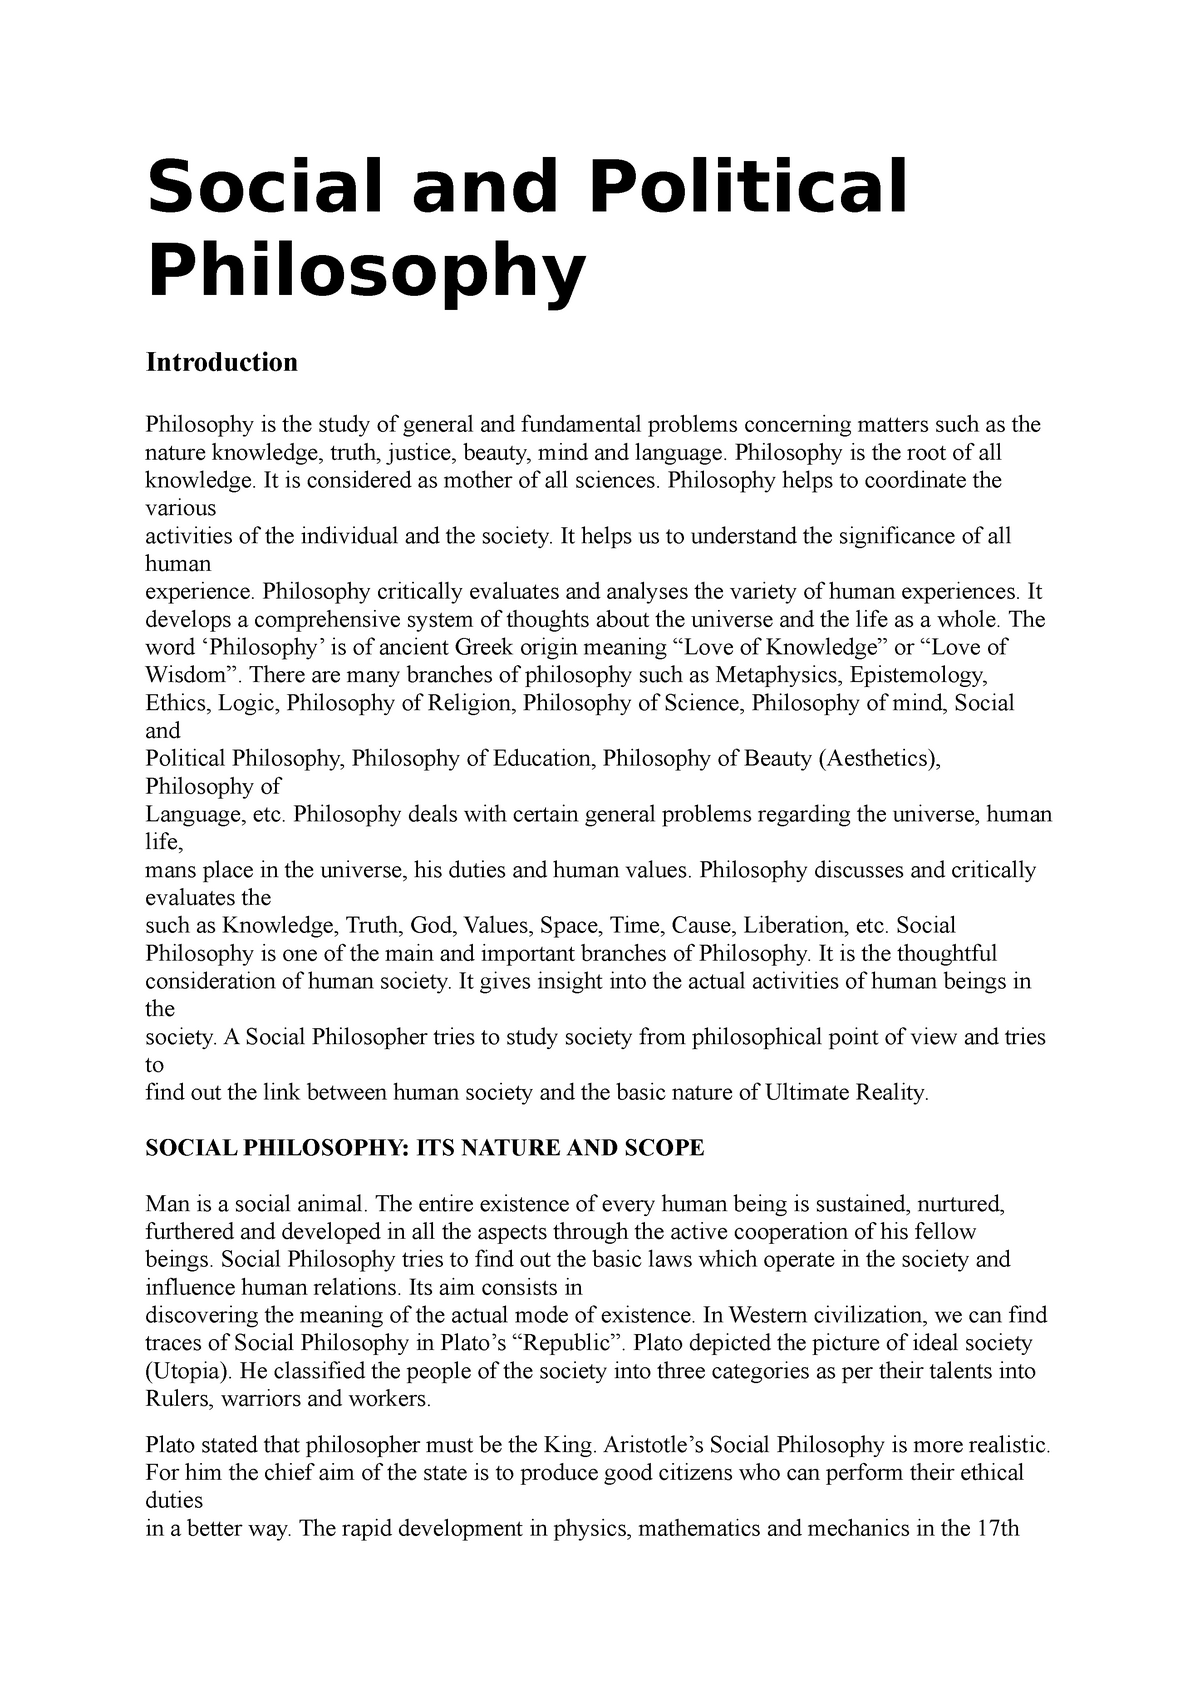 Introduction Social and Political Philosophy - Social and Political  Philosophy Introduction - Studocu